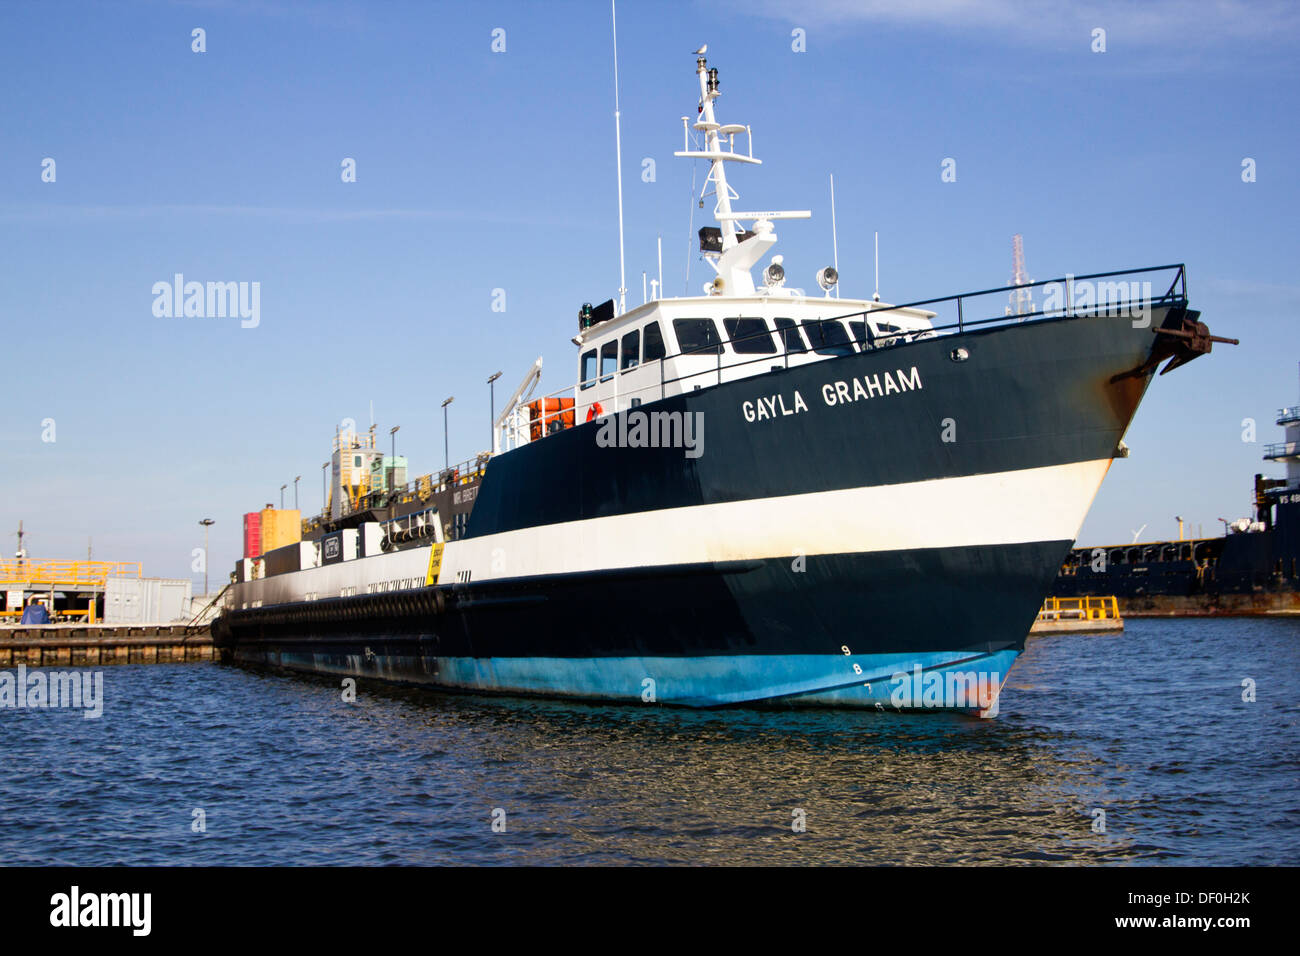 GAYLA GRAHAM crew boat in Port Fourchon Stock Photo